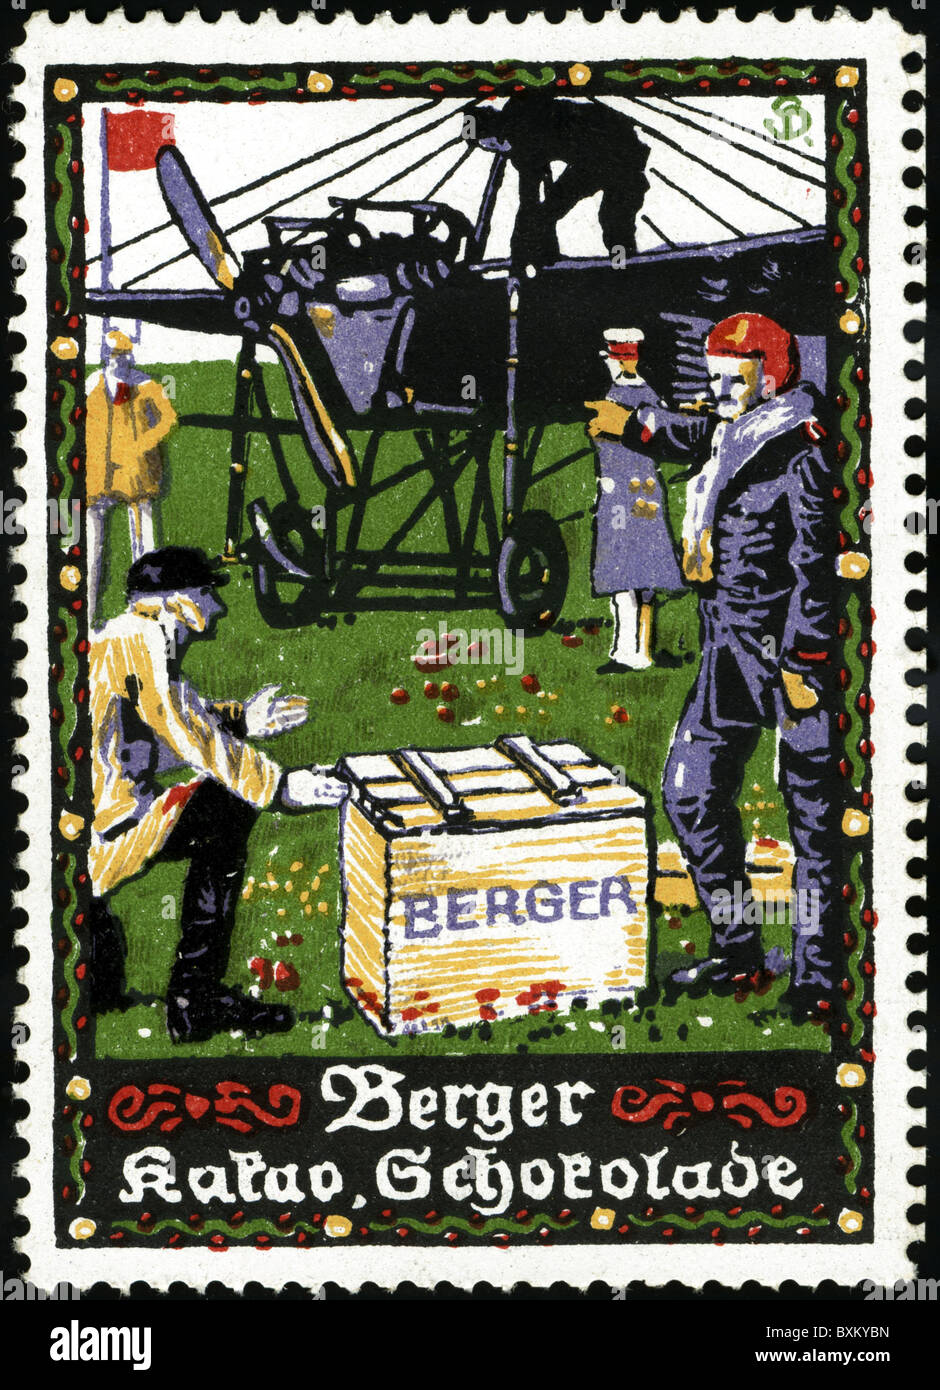 transport / transportation, aviation, air cargo, airplane transporting box with chocolate, advertising of Berger Kakao Schokolade Company, Pössneck, Thuringia, Germany, circa 1912, Additional-Rights-Clearences-Not Available Stock Photo